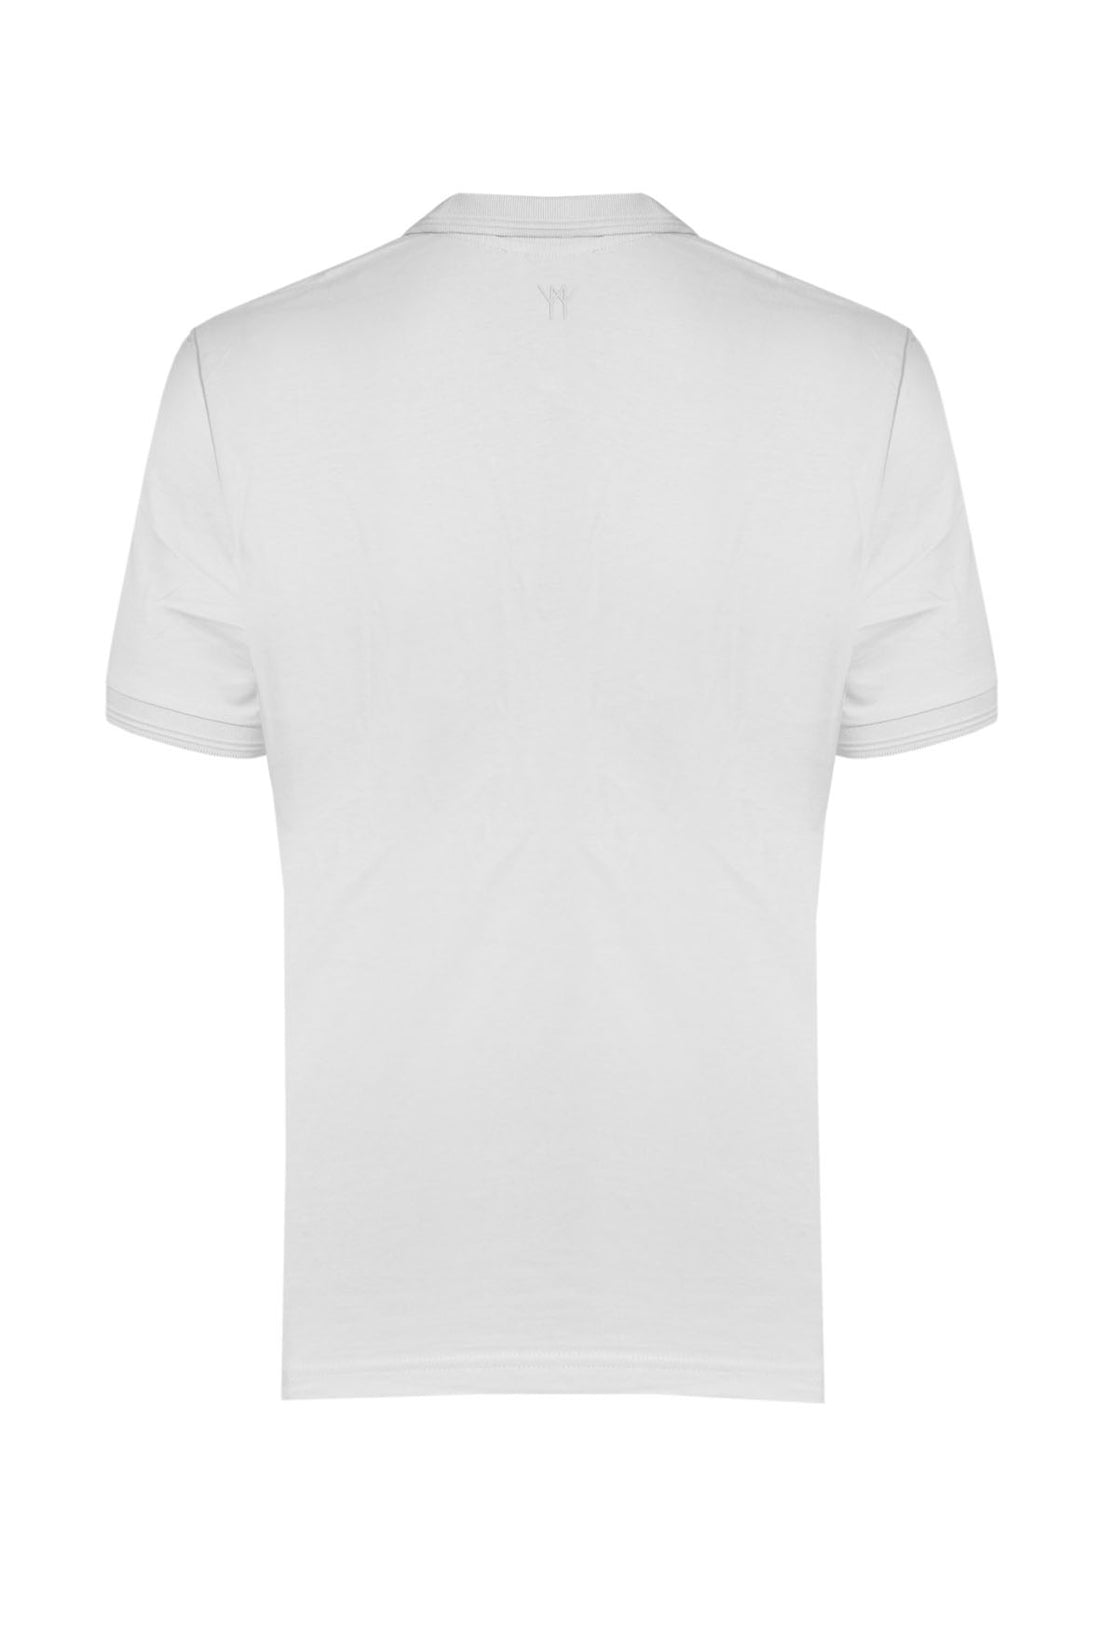 Cotton Polo Shirt Without Buttons - White